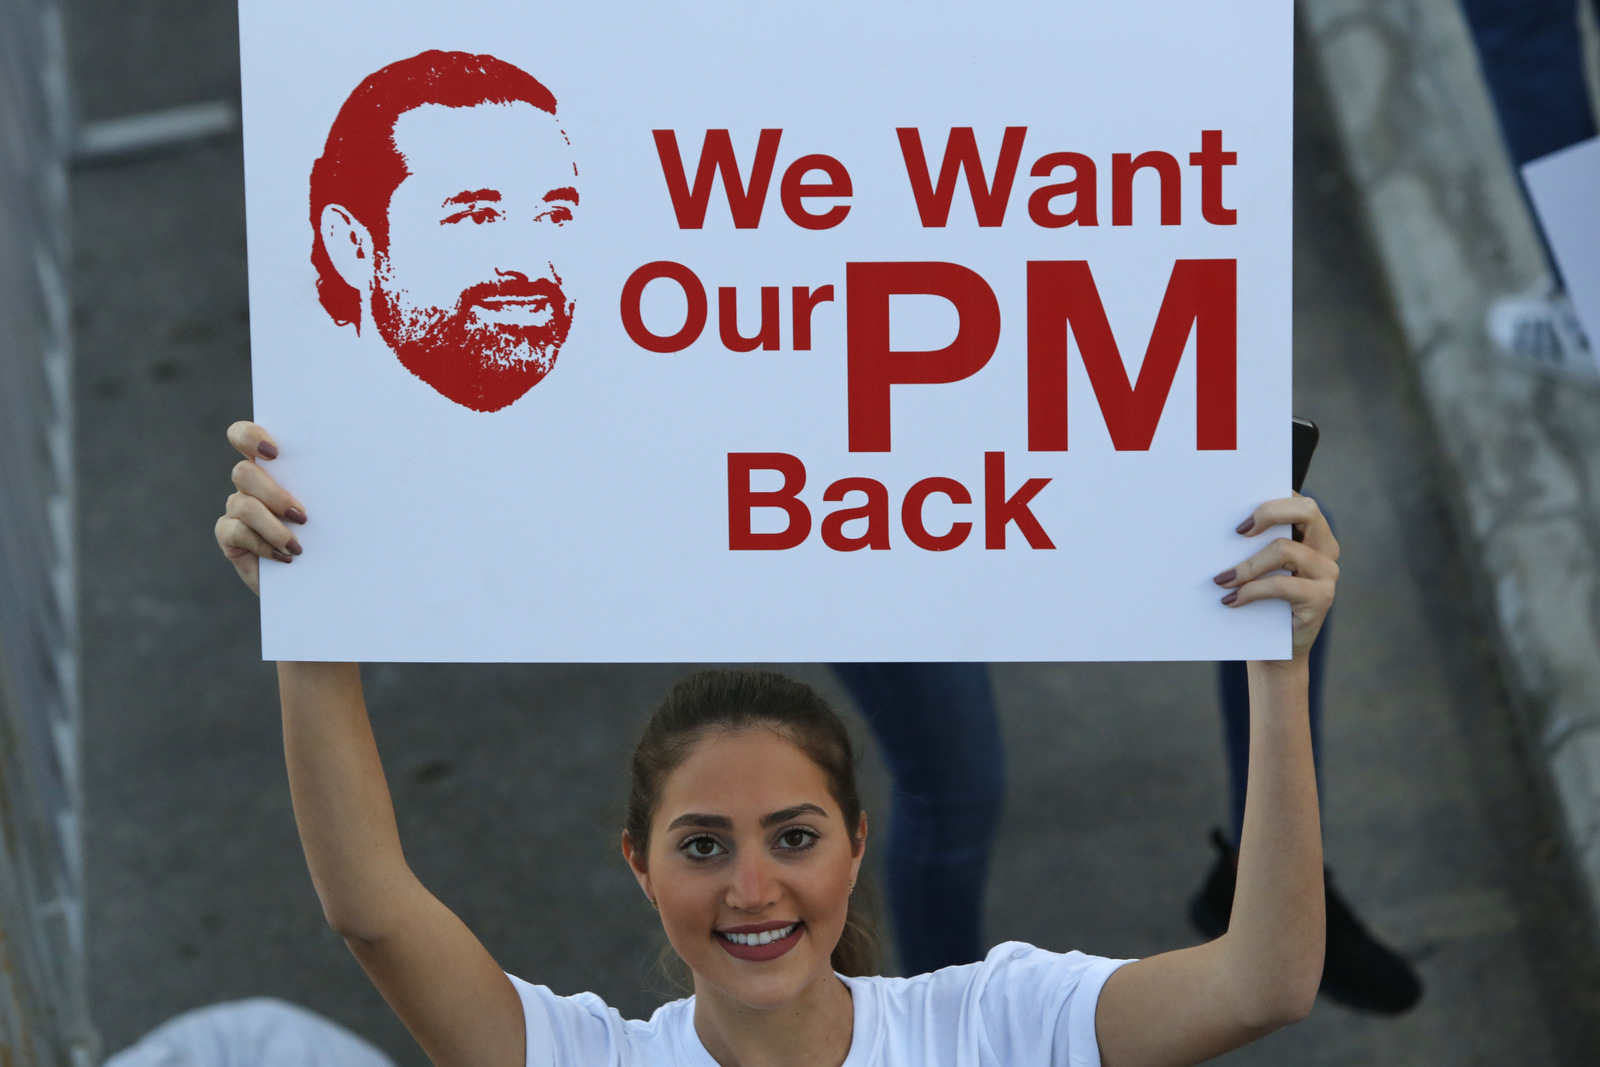 A Lebanese woman holds a placard supporting the outgoing Lebanese Prime Minister Saad Hariri to return from Saudi Arabia during the Beirut Marathon, in Beirut, Lebanon, Nov. 12, 2017. (AP/Hassan Ammar)